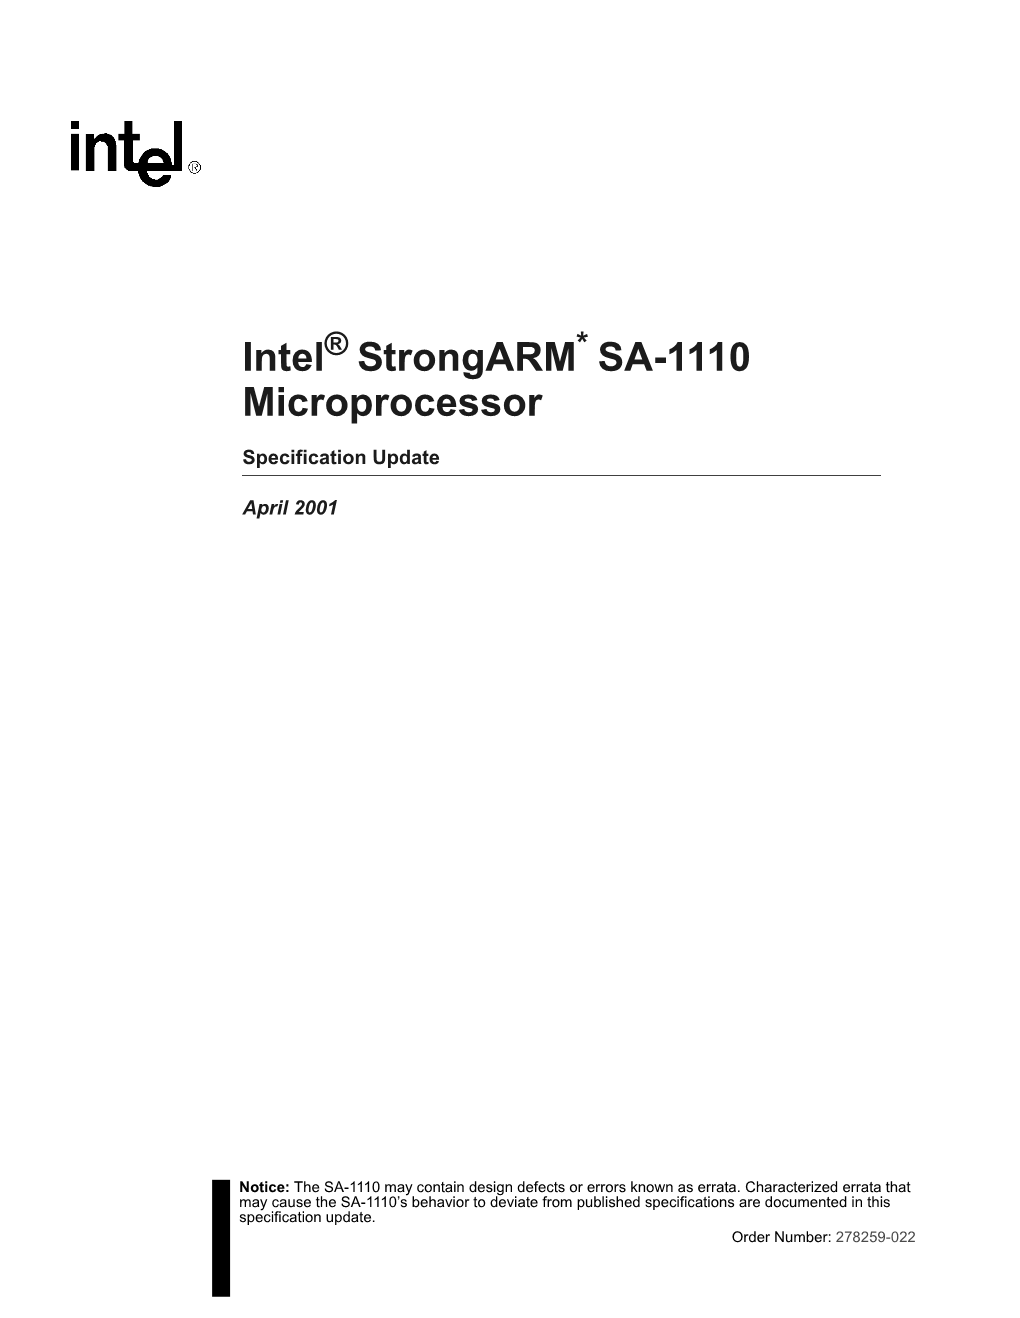 Intel Strongarm SA-1110 Microprocessor Developer’S Manual and Its Underlying Note 1 Have Been Changed